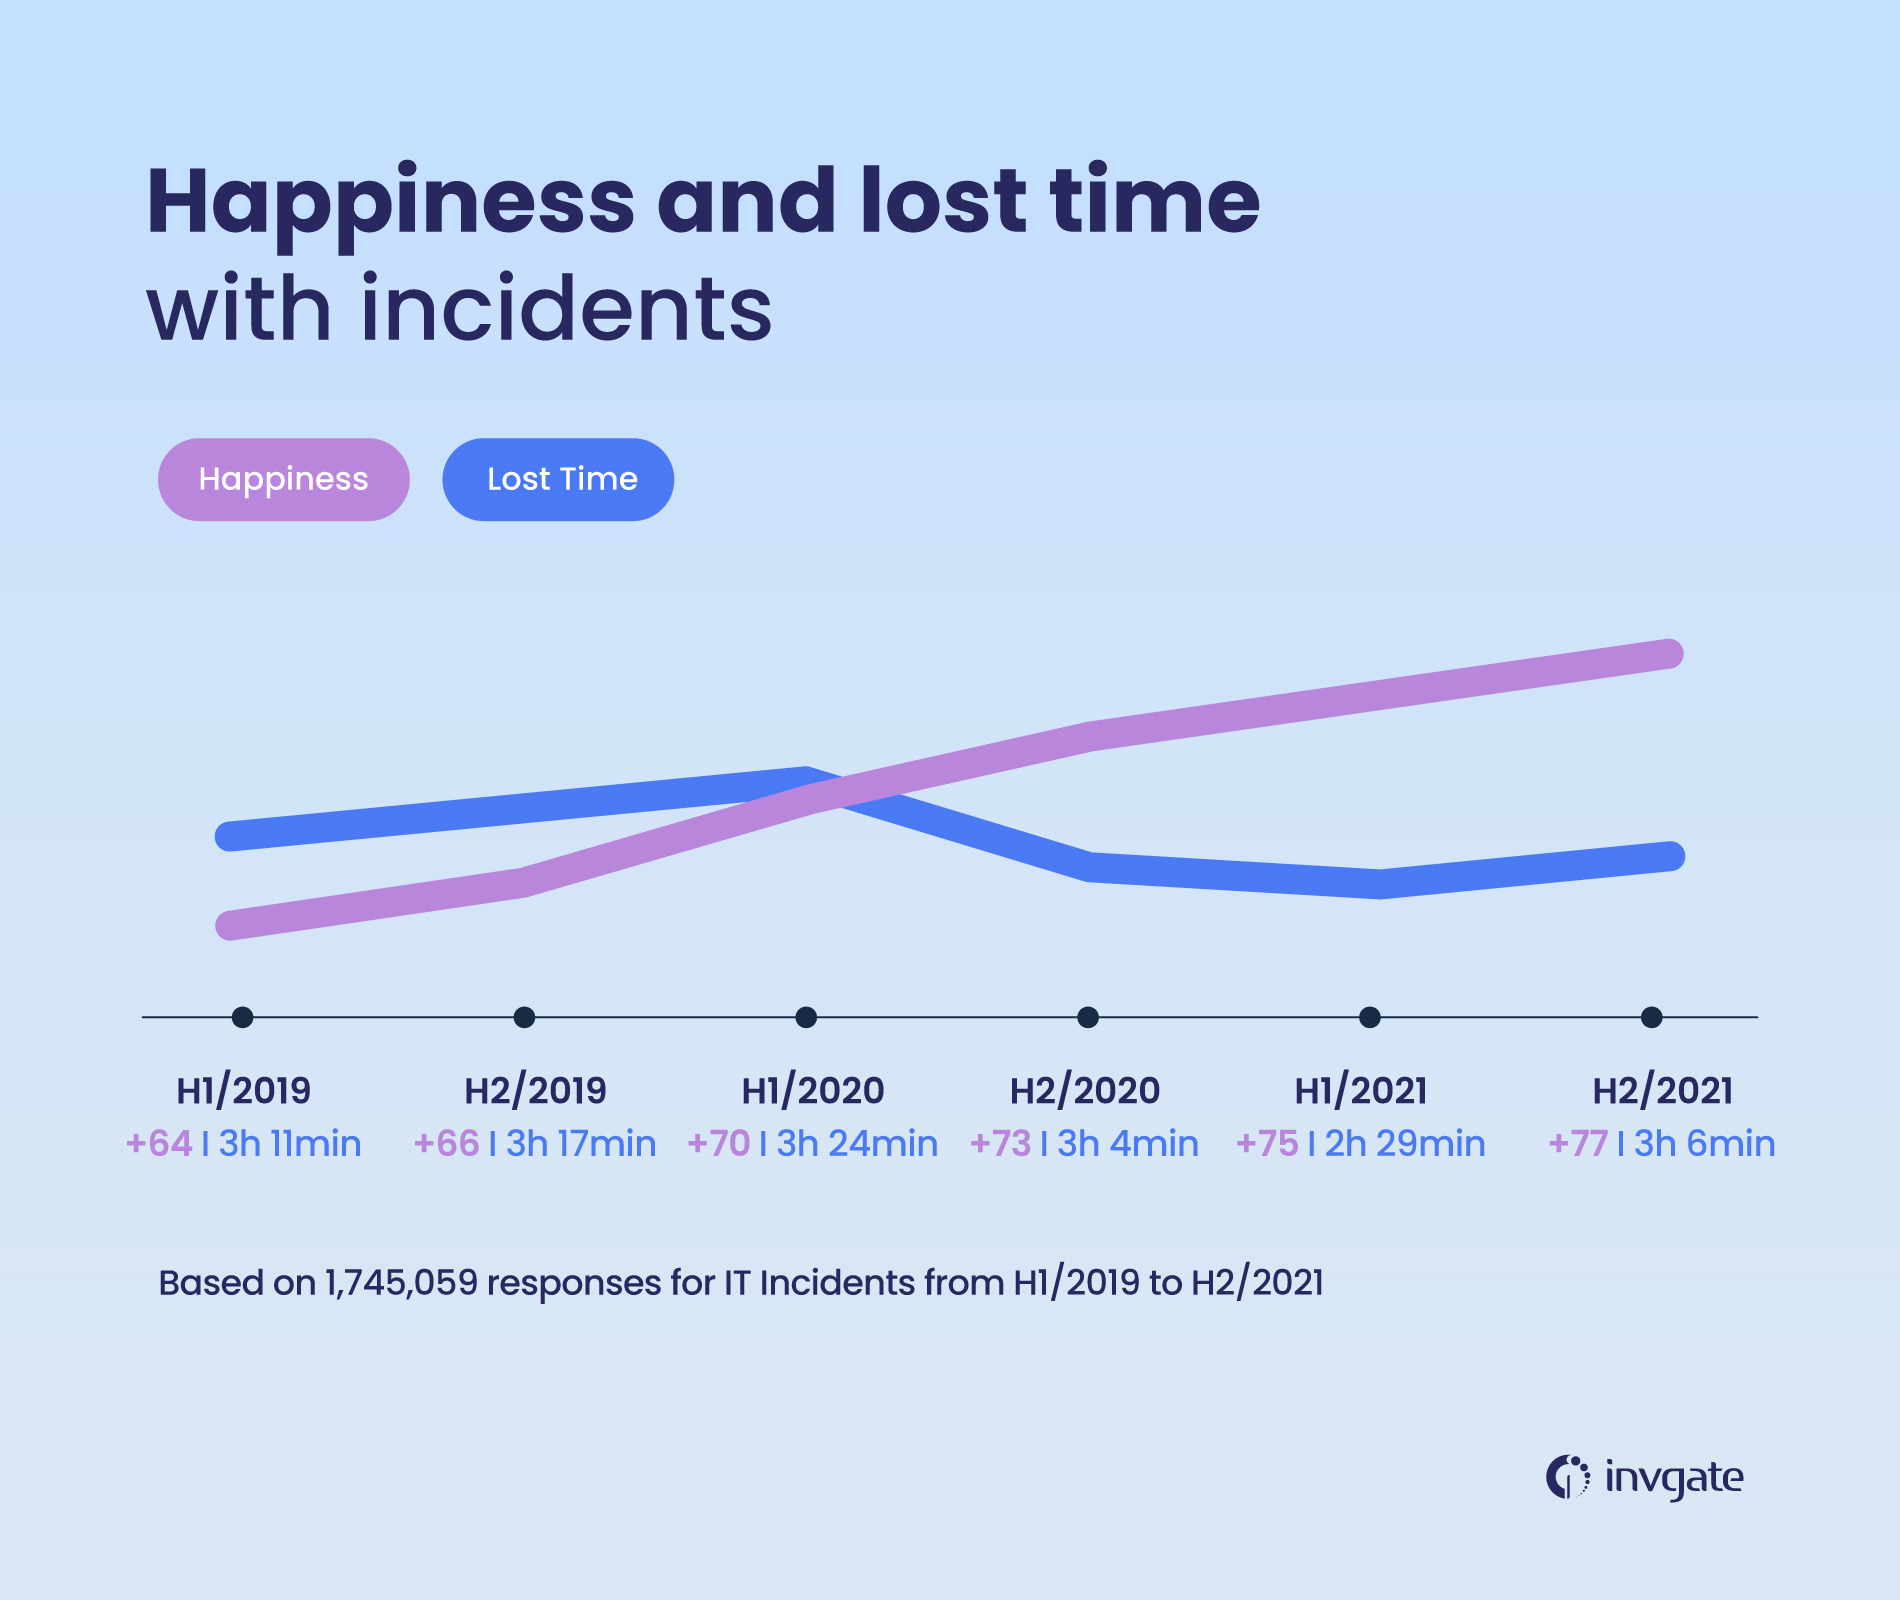 Evolution of happiness and lost time with incidents, according to the Global IT Experience Benchmark Report from HappySignals.